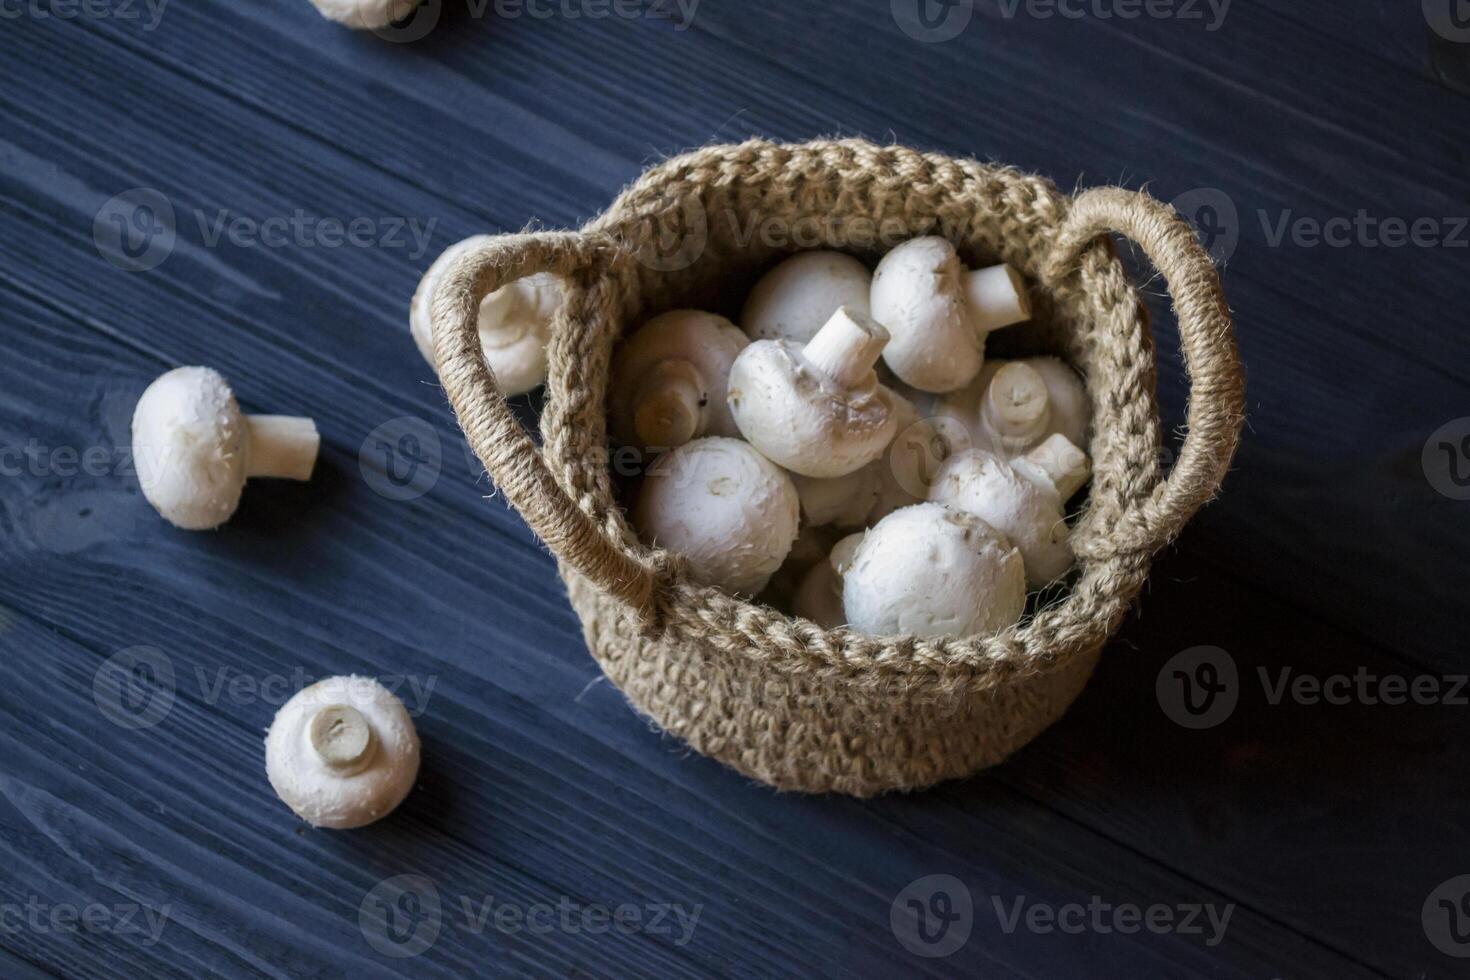 The champignons in a basket on a wooden table. photo